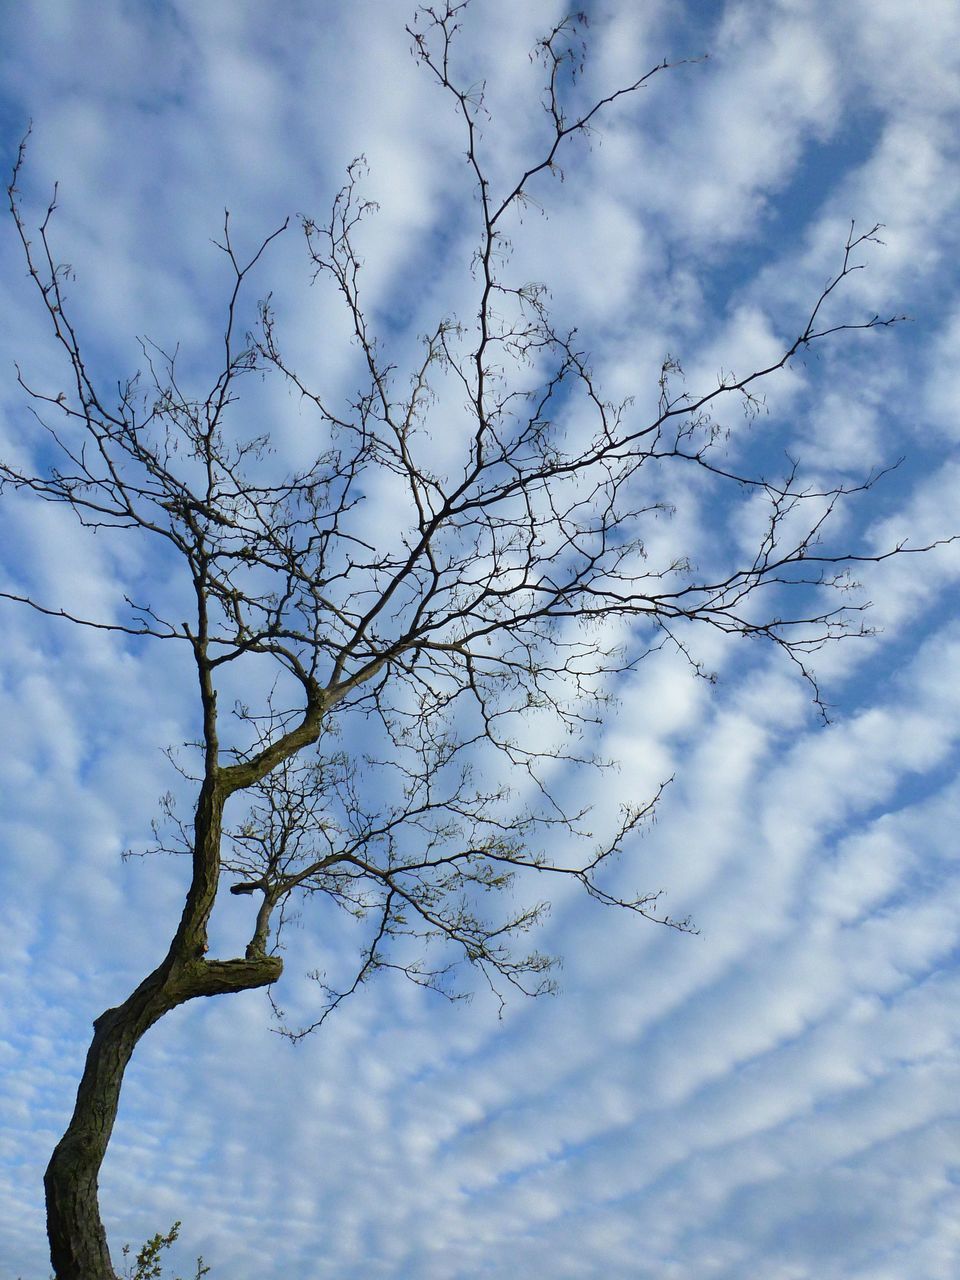 sky, branch, tree, cloud, nature, plant, blue, no people, winter, low angle view, beauty in nature, bare tree, outdoors, flower, sunlight, tranquility, day, leaf, environment, frost, scenics - nature, twig